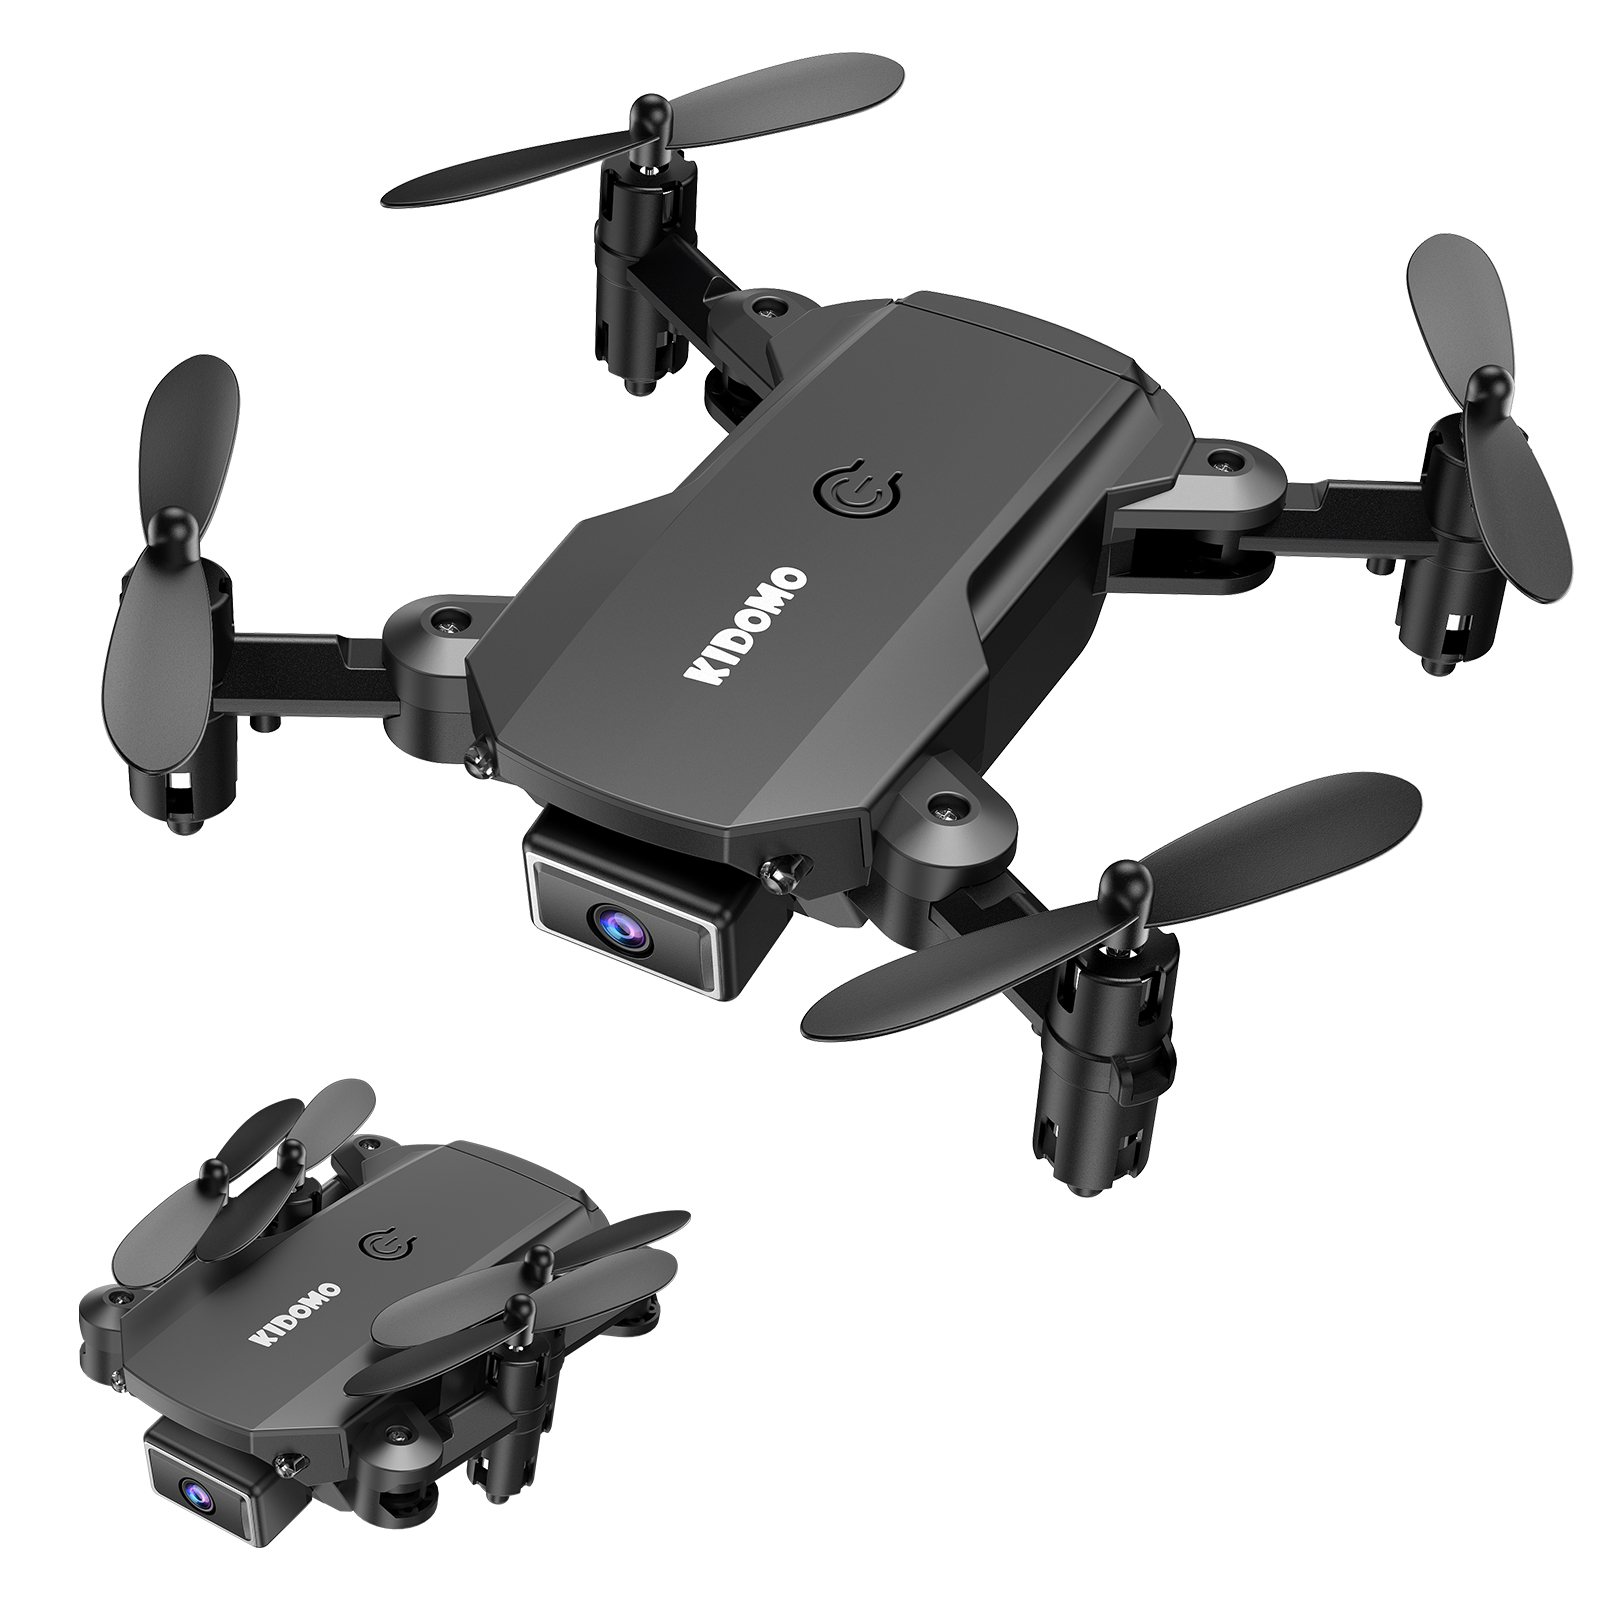 F02 Foldable Drone with 1080P FPV Camera, Voice/Gesture Control